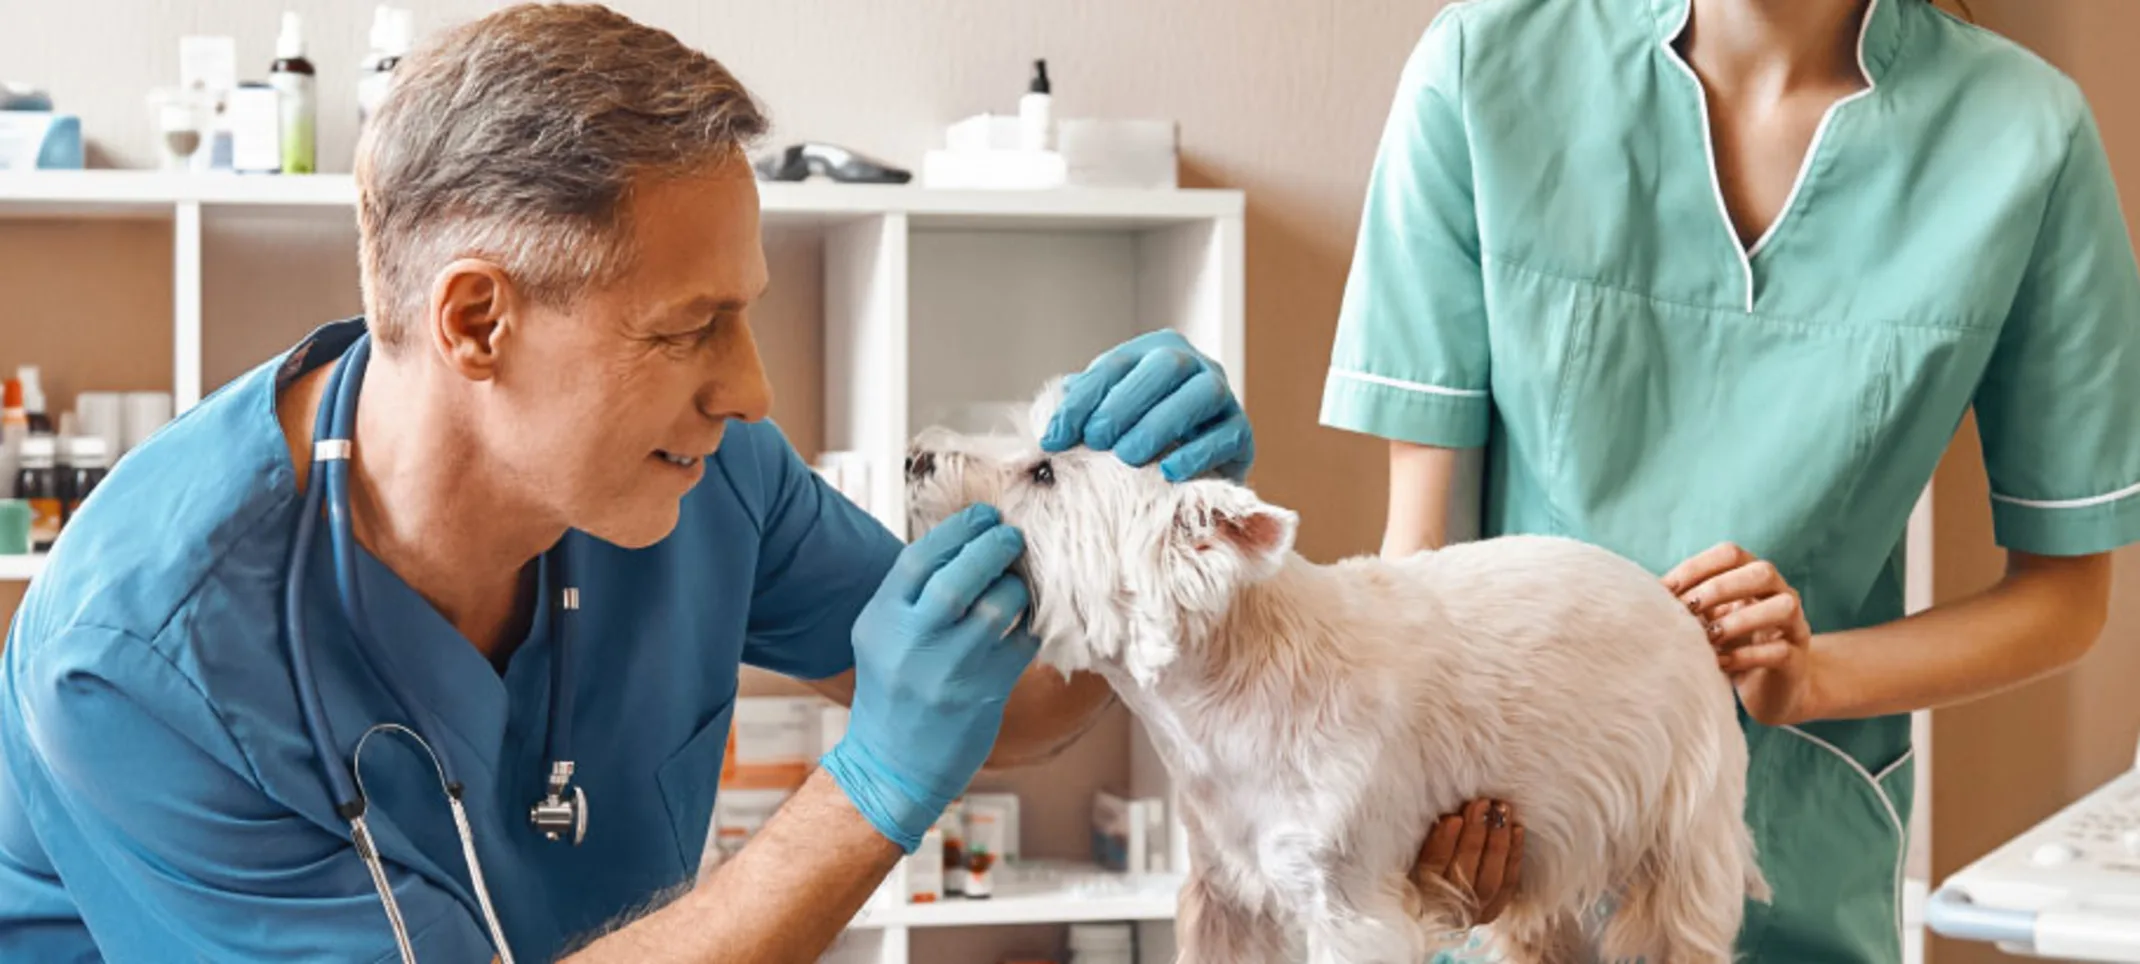 Dog Examine by Doctors Medical